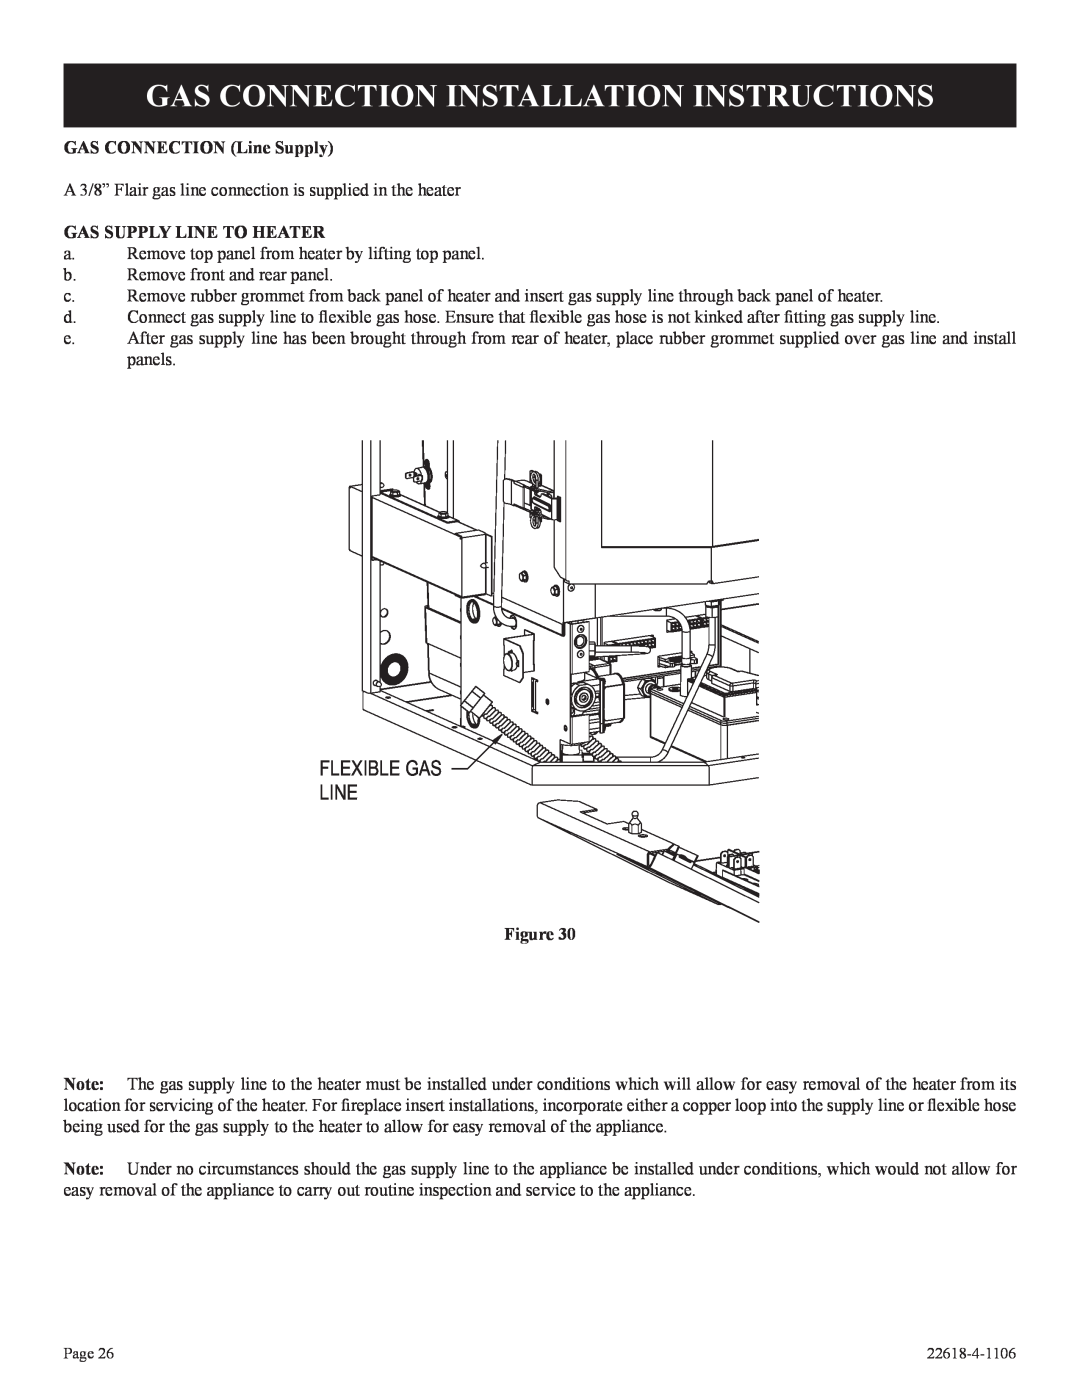 GN National Electric GN, PV-28SV50 Gas Connection Installation Instructions, Flexible Gas Line, GAS CONNECTION Line Supply 